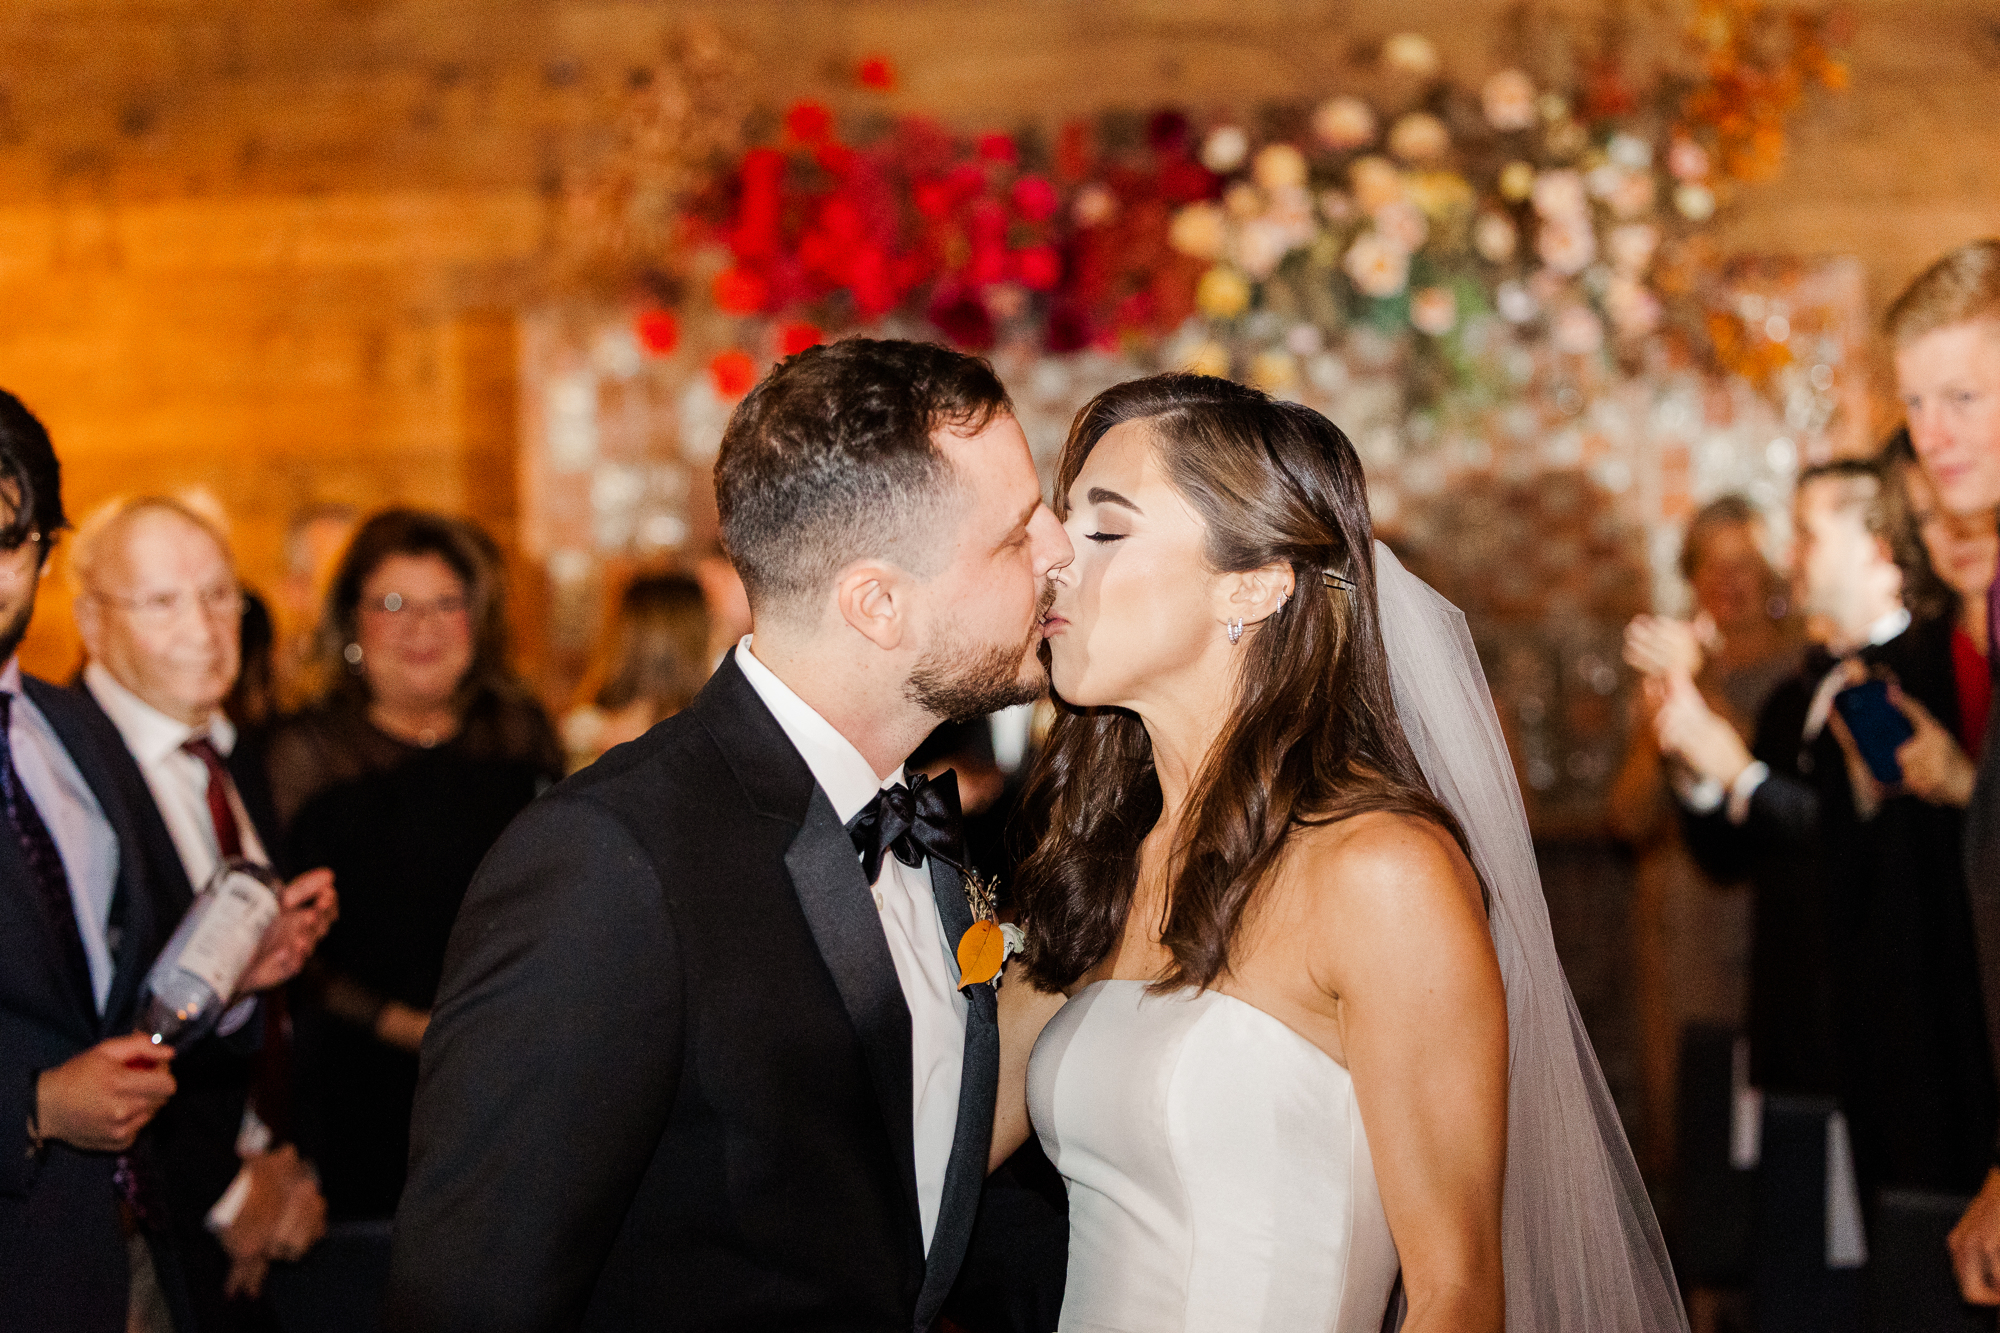 Intimate New York Milling Room Wedding Photos on a Rainy Fall Day